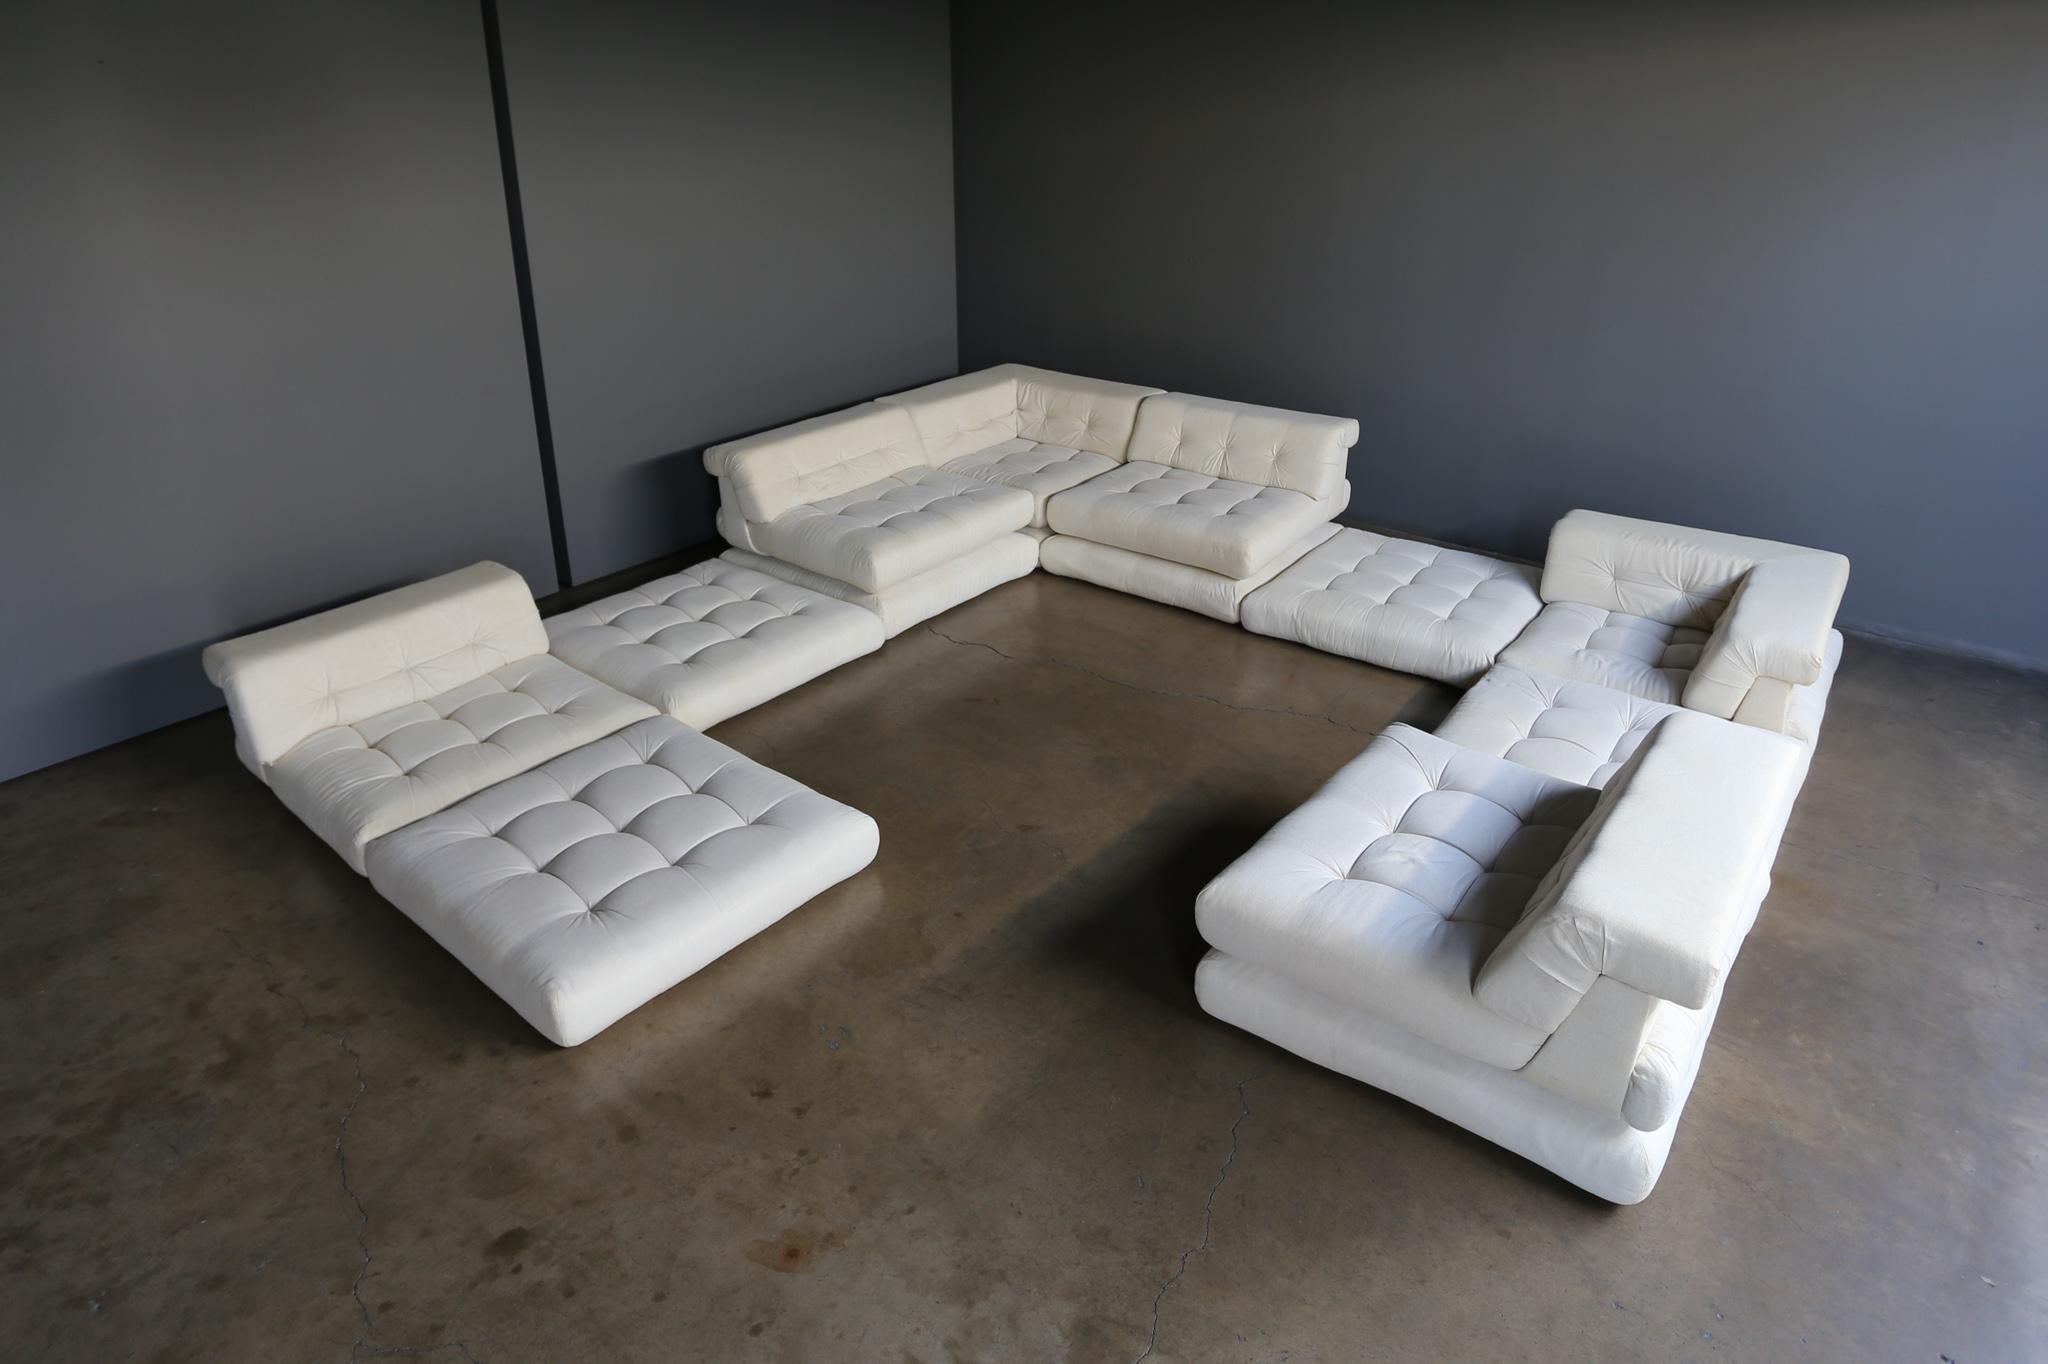 Large 'Mah Jong' sectional sofa, designed in 1971 by Hans Hopfer. Manufactured by Roche Bobois, France. 

14 cushions. Each measures: 38.5